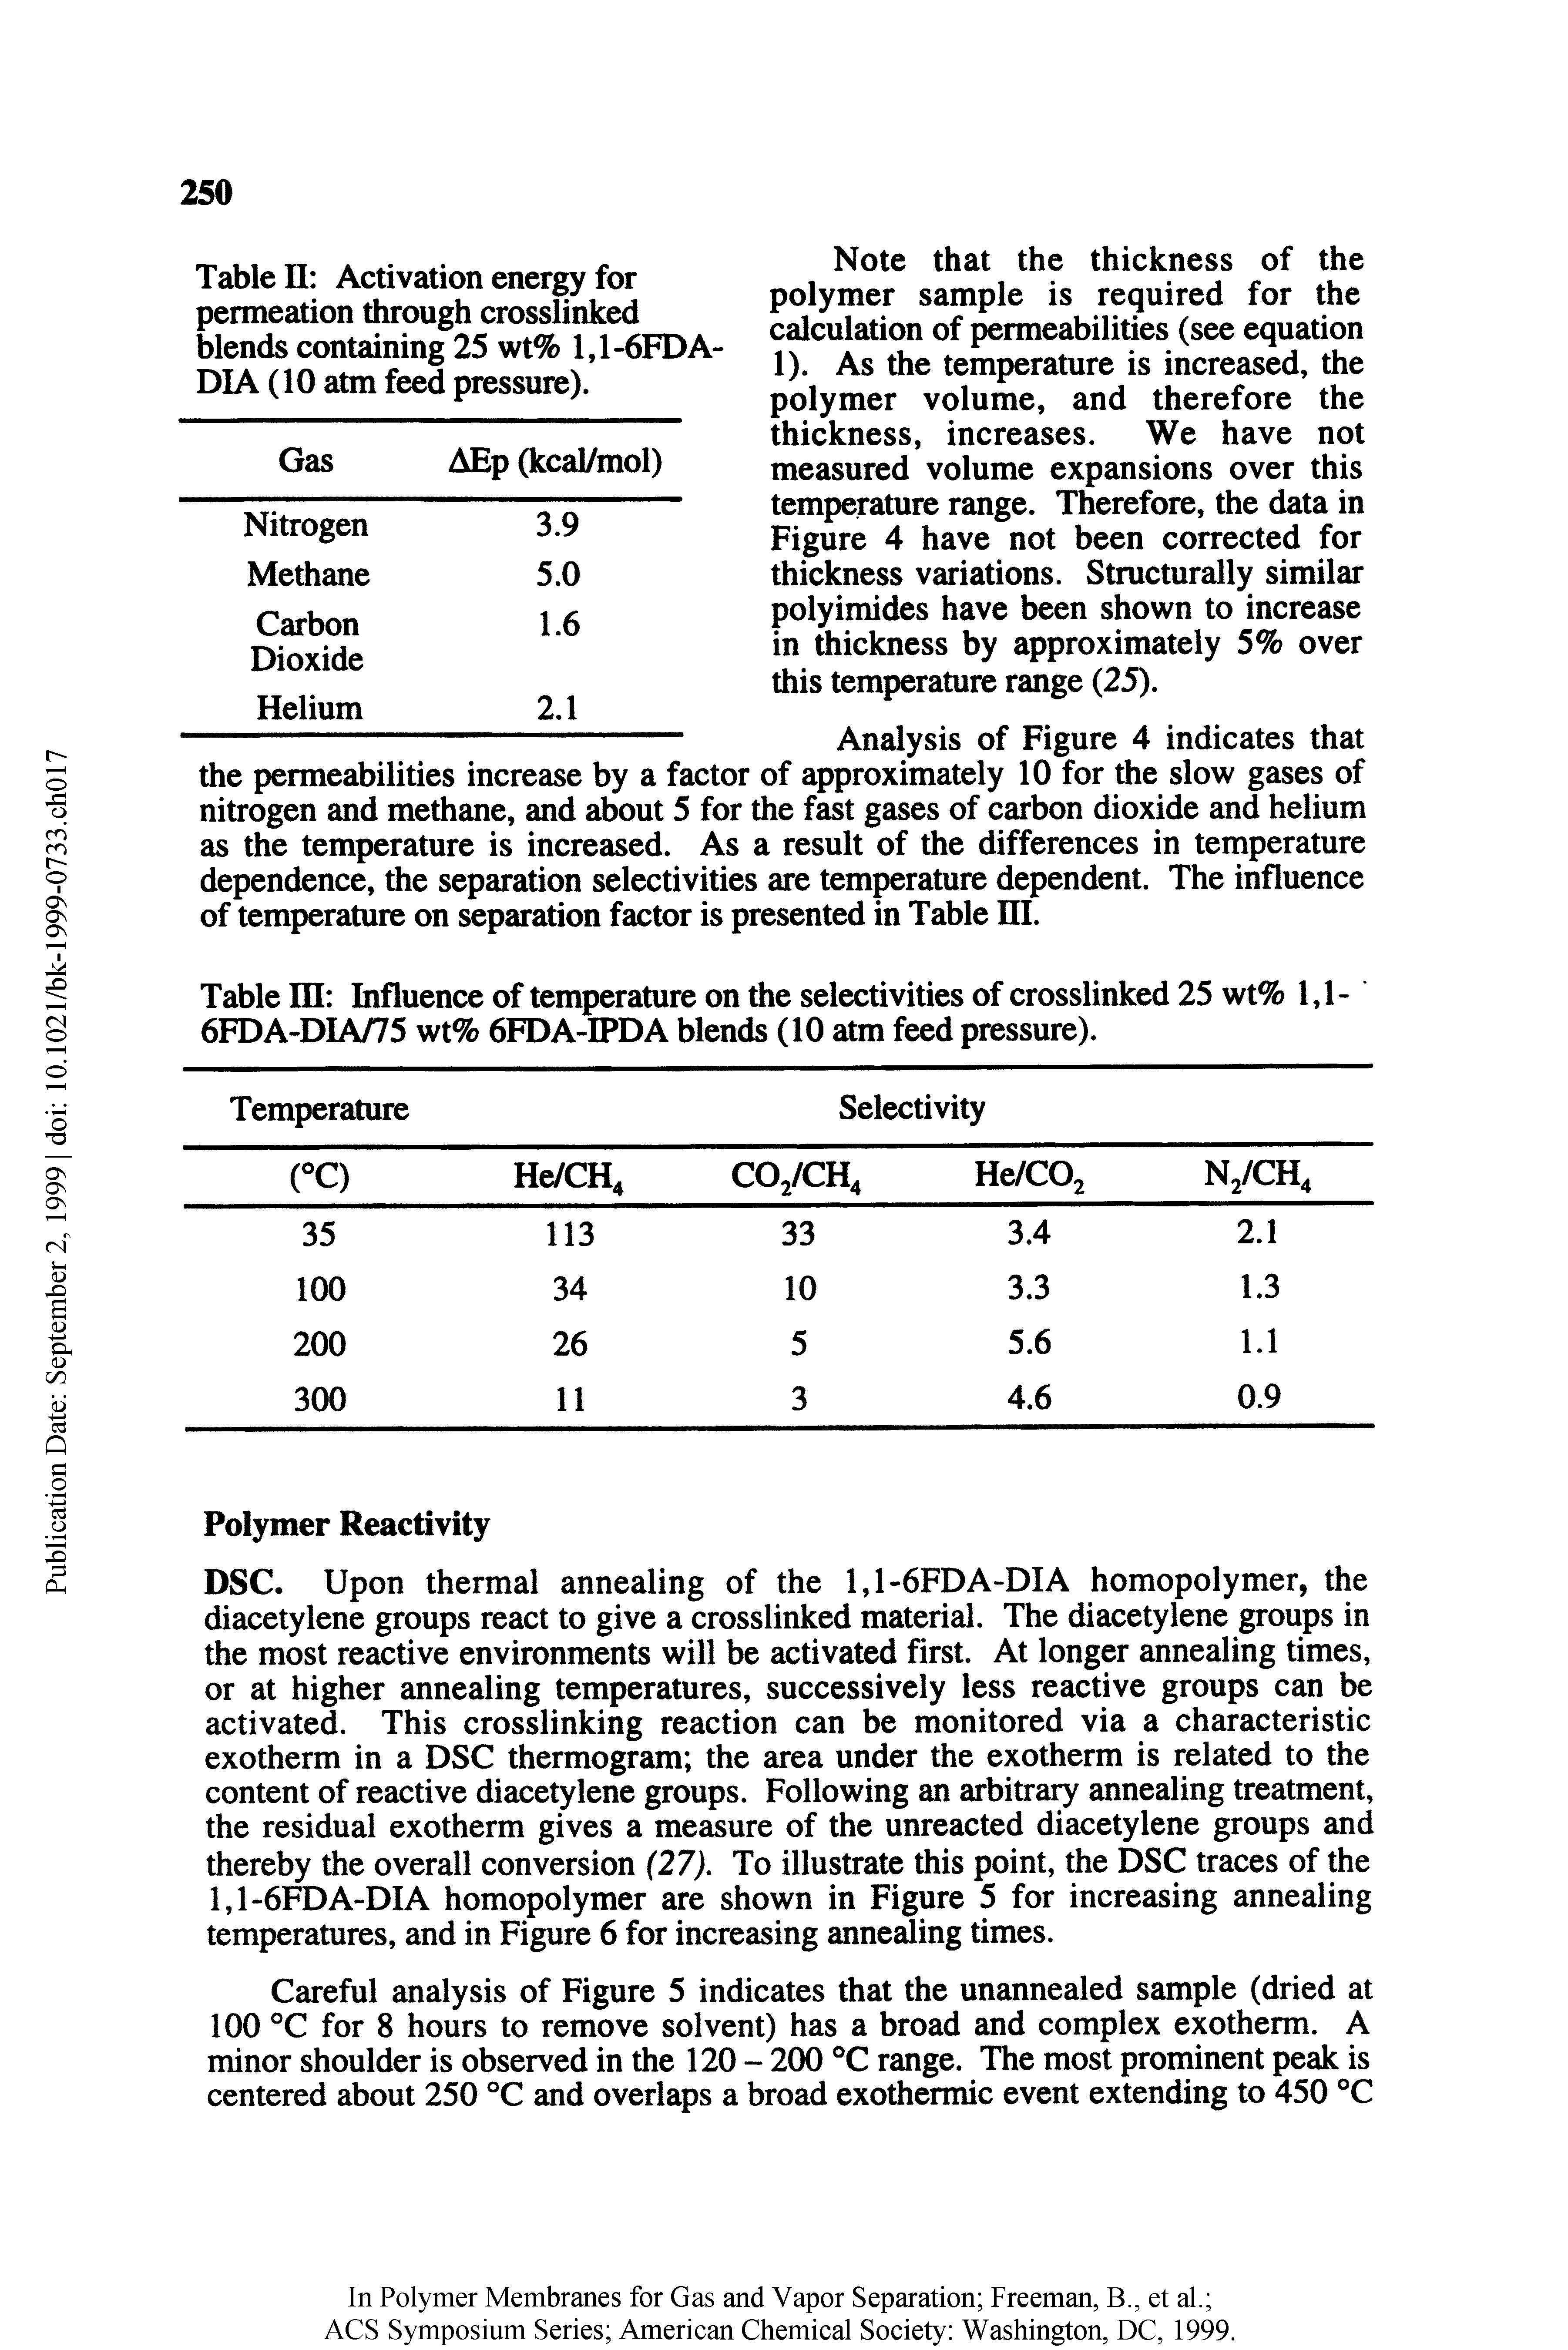 Table II Activation energy for permeation through crosslinked blends containing 25 wt% 1,1-6FDA-DIA (10 atm feed pressure).